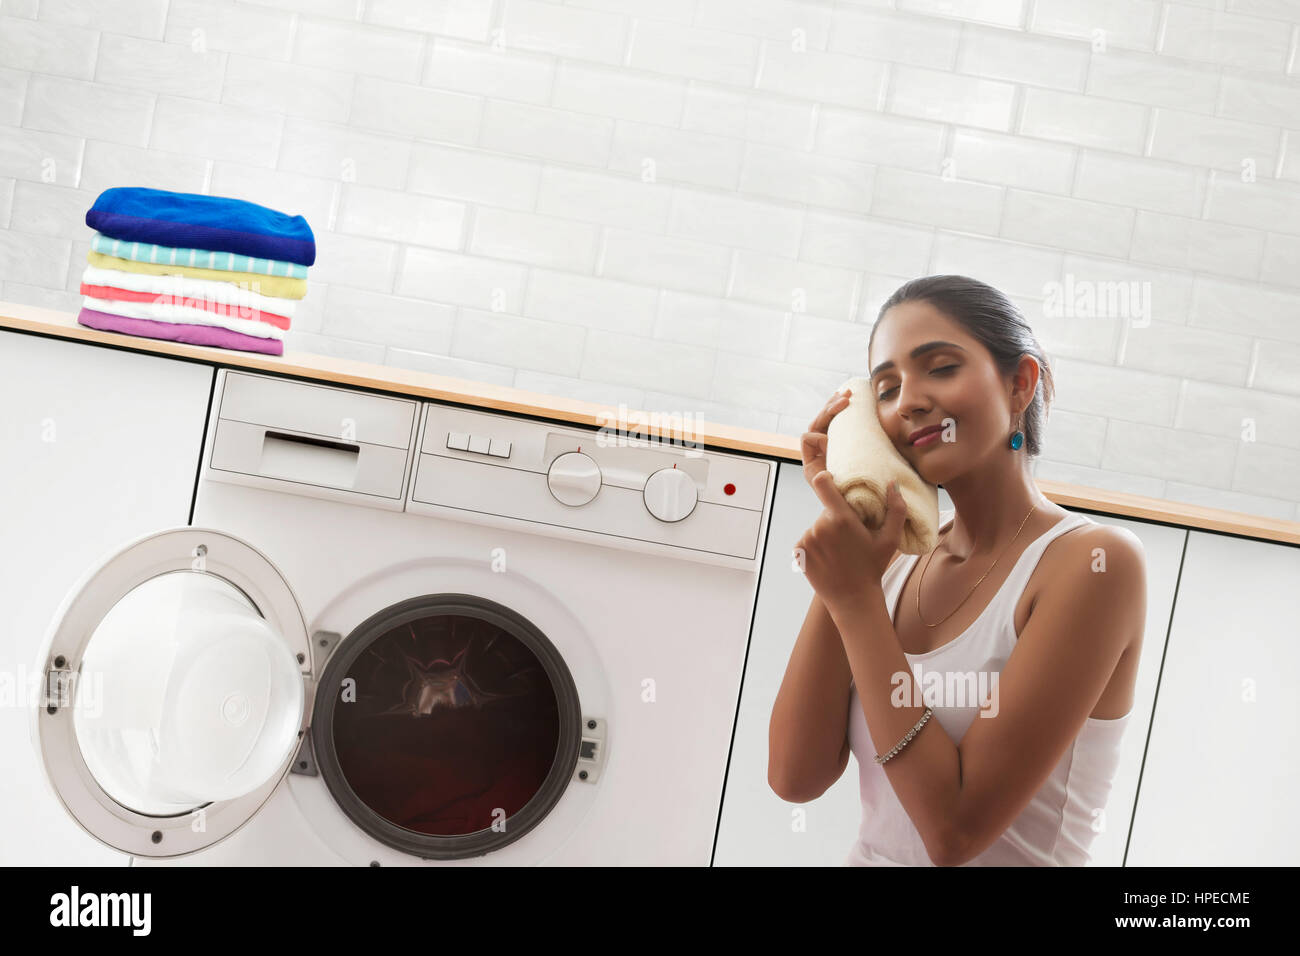 Young woman holding laundry at face in front of washing machine Stock Photo